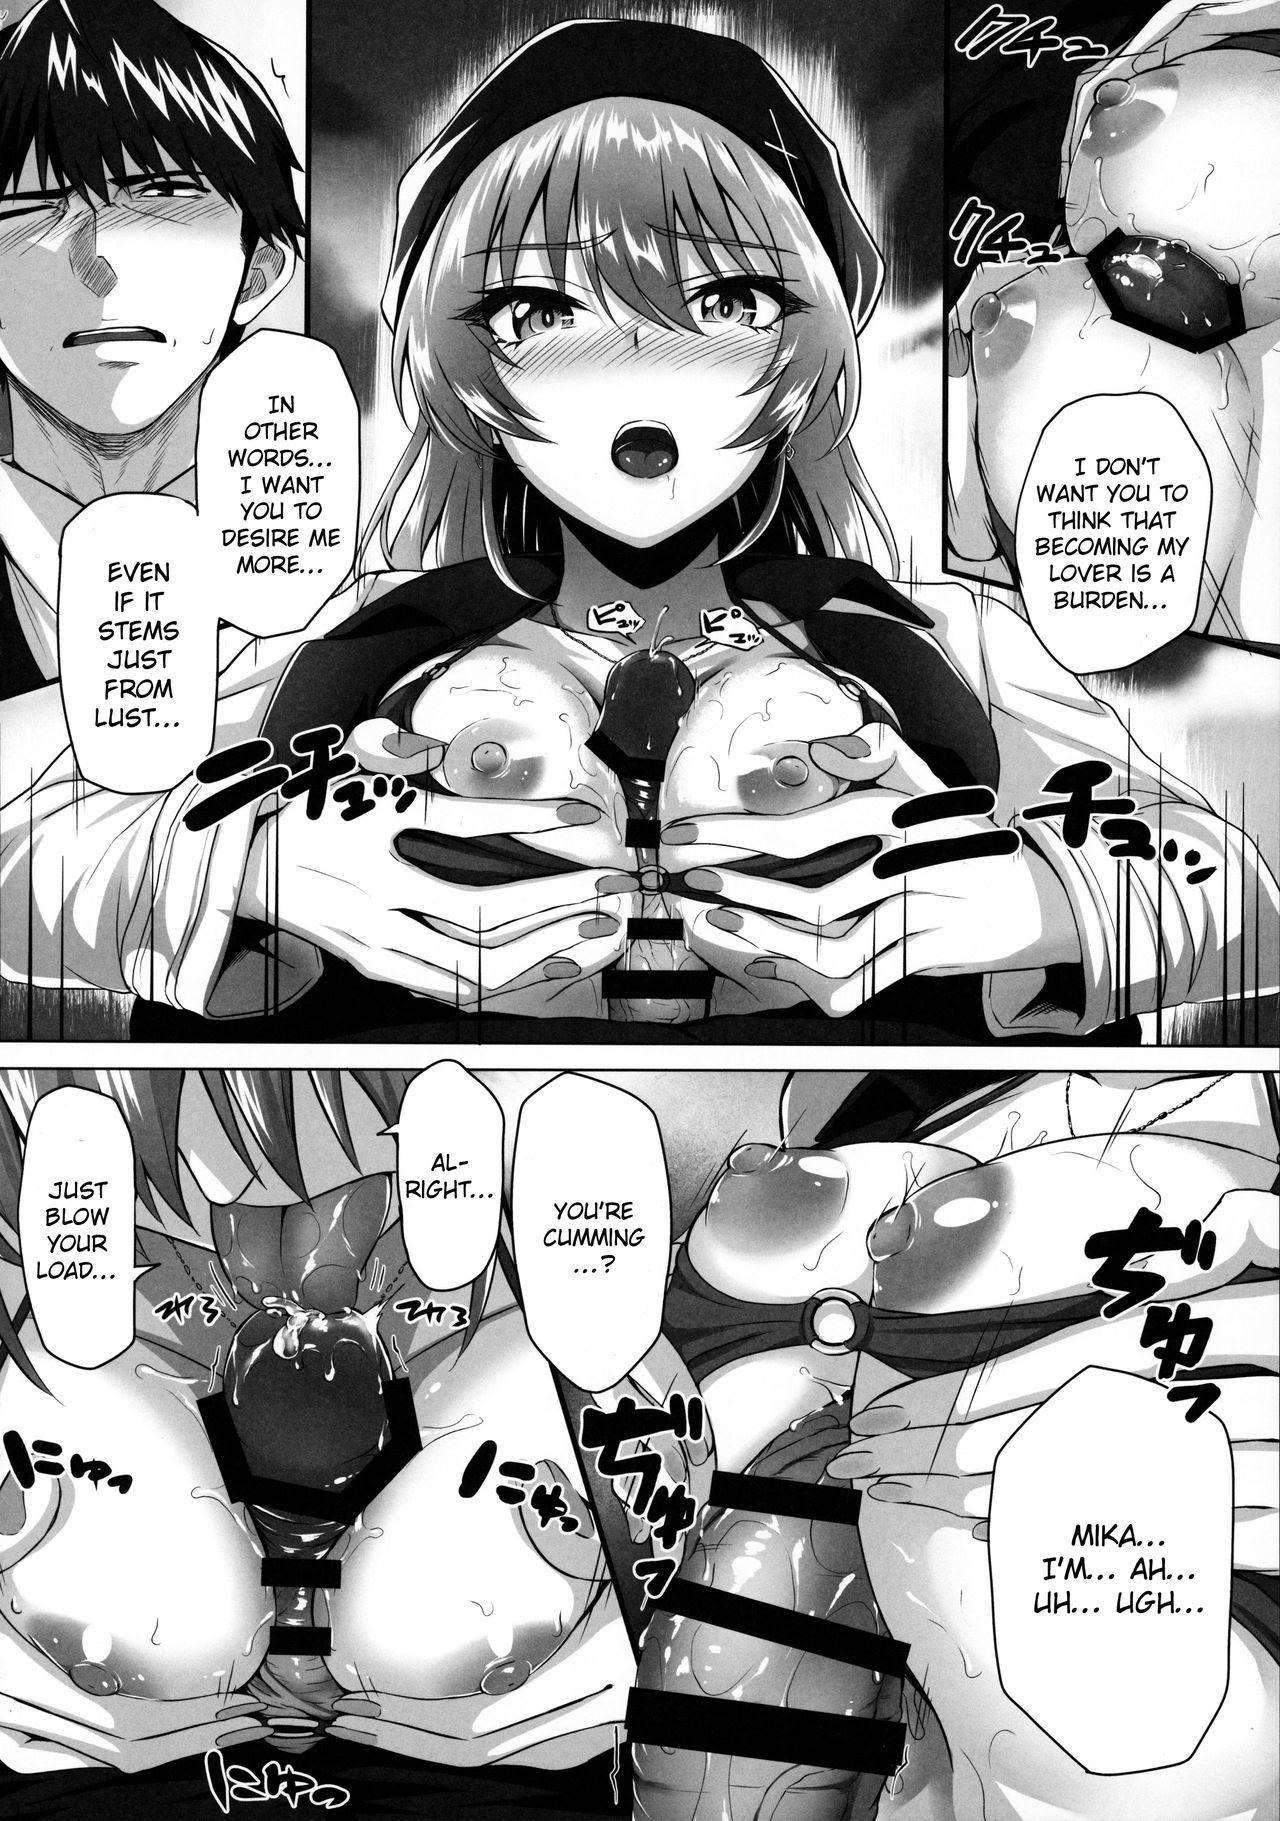 Chile Mika and P Plus - The idolmaster Gaysex - Page 11